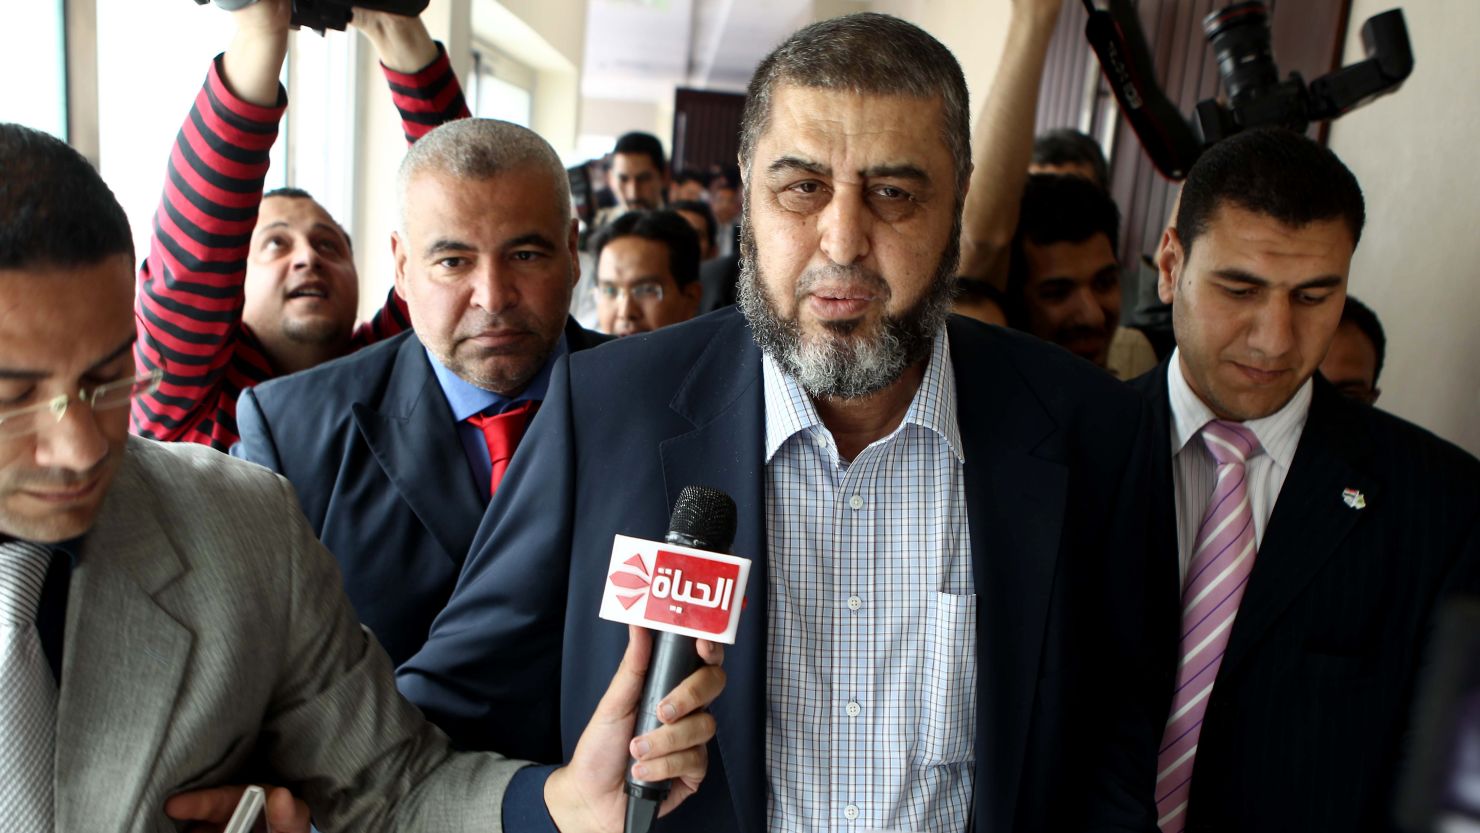 Khairat el-Shater, the Muslim Brotherhood candidate, is awaiting a court decision regarding his eligibility.